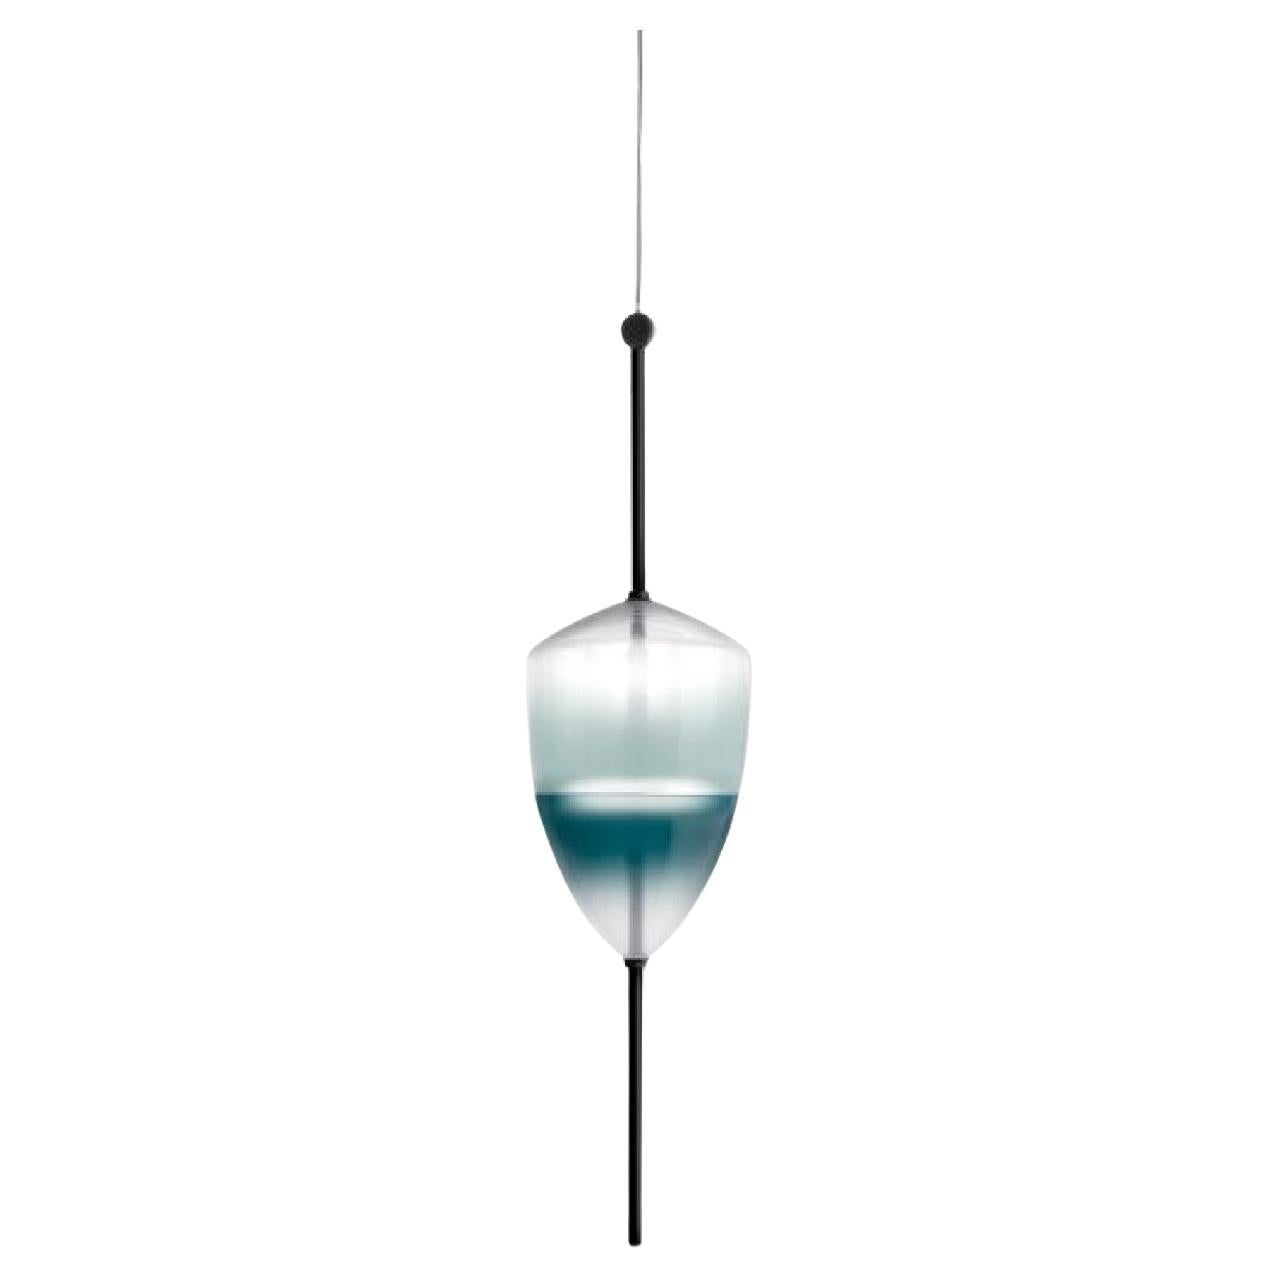 FLOW[T] S6 Pendant lamp in Turquoise by Nao Tamura for Wonderglass For Sale